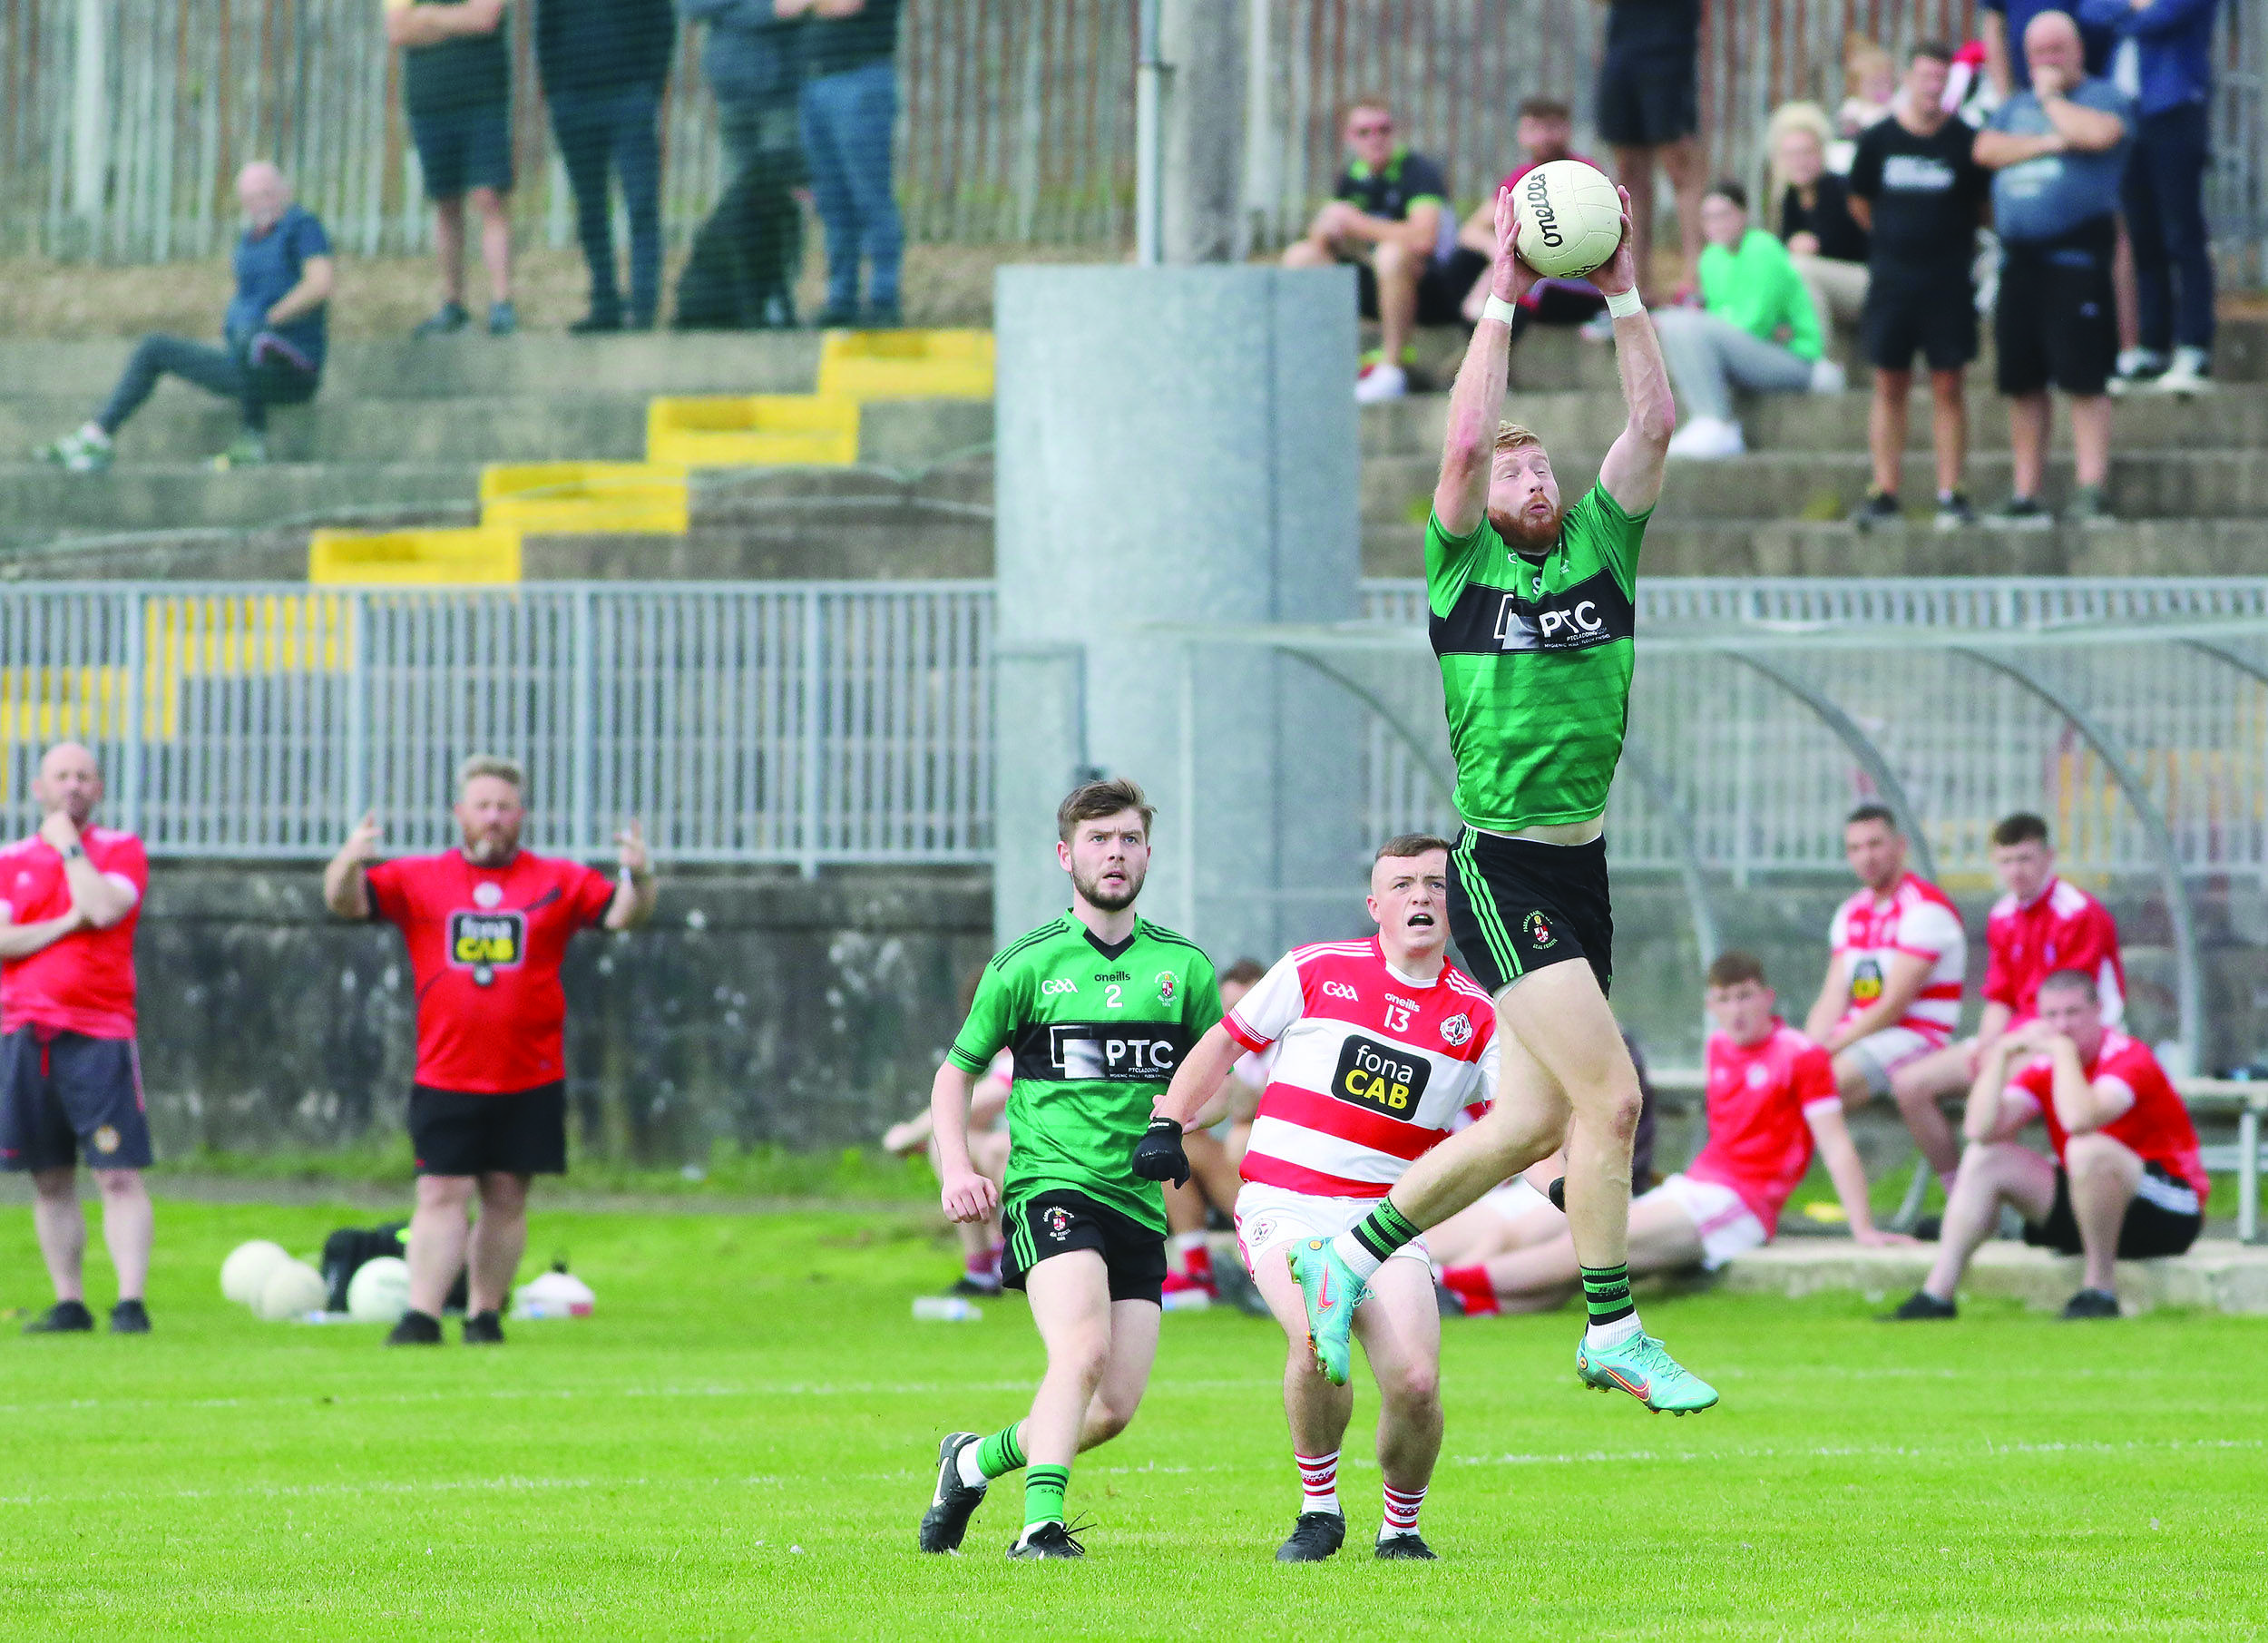 Niall McKenna rises high to fetch the ball during Sarsfield’s impressive quarter-final win over St Paul’s